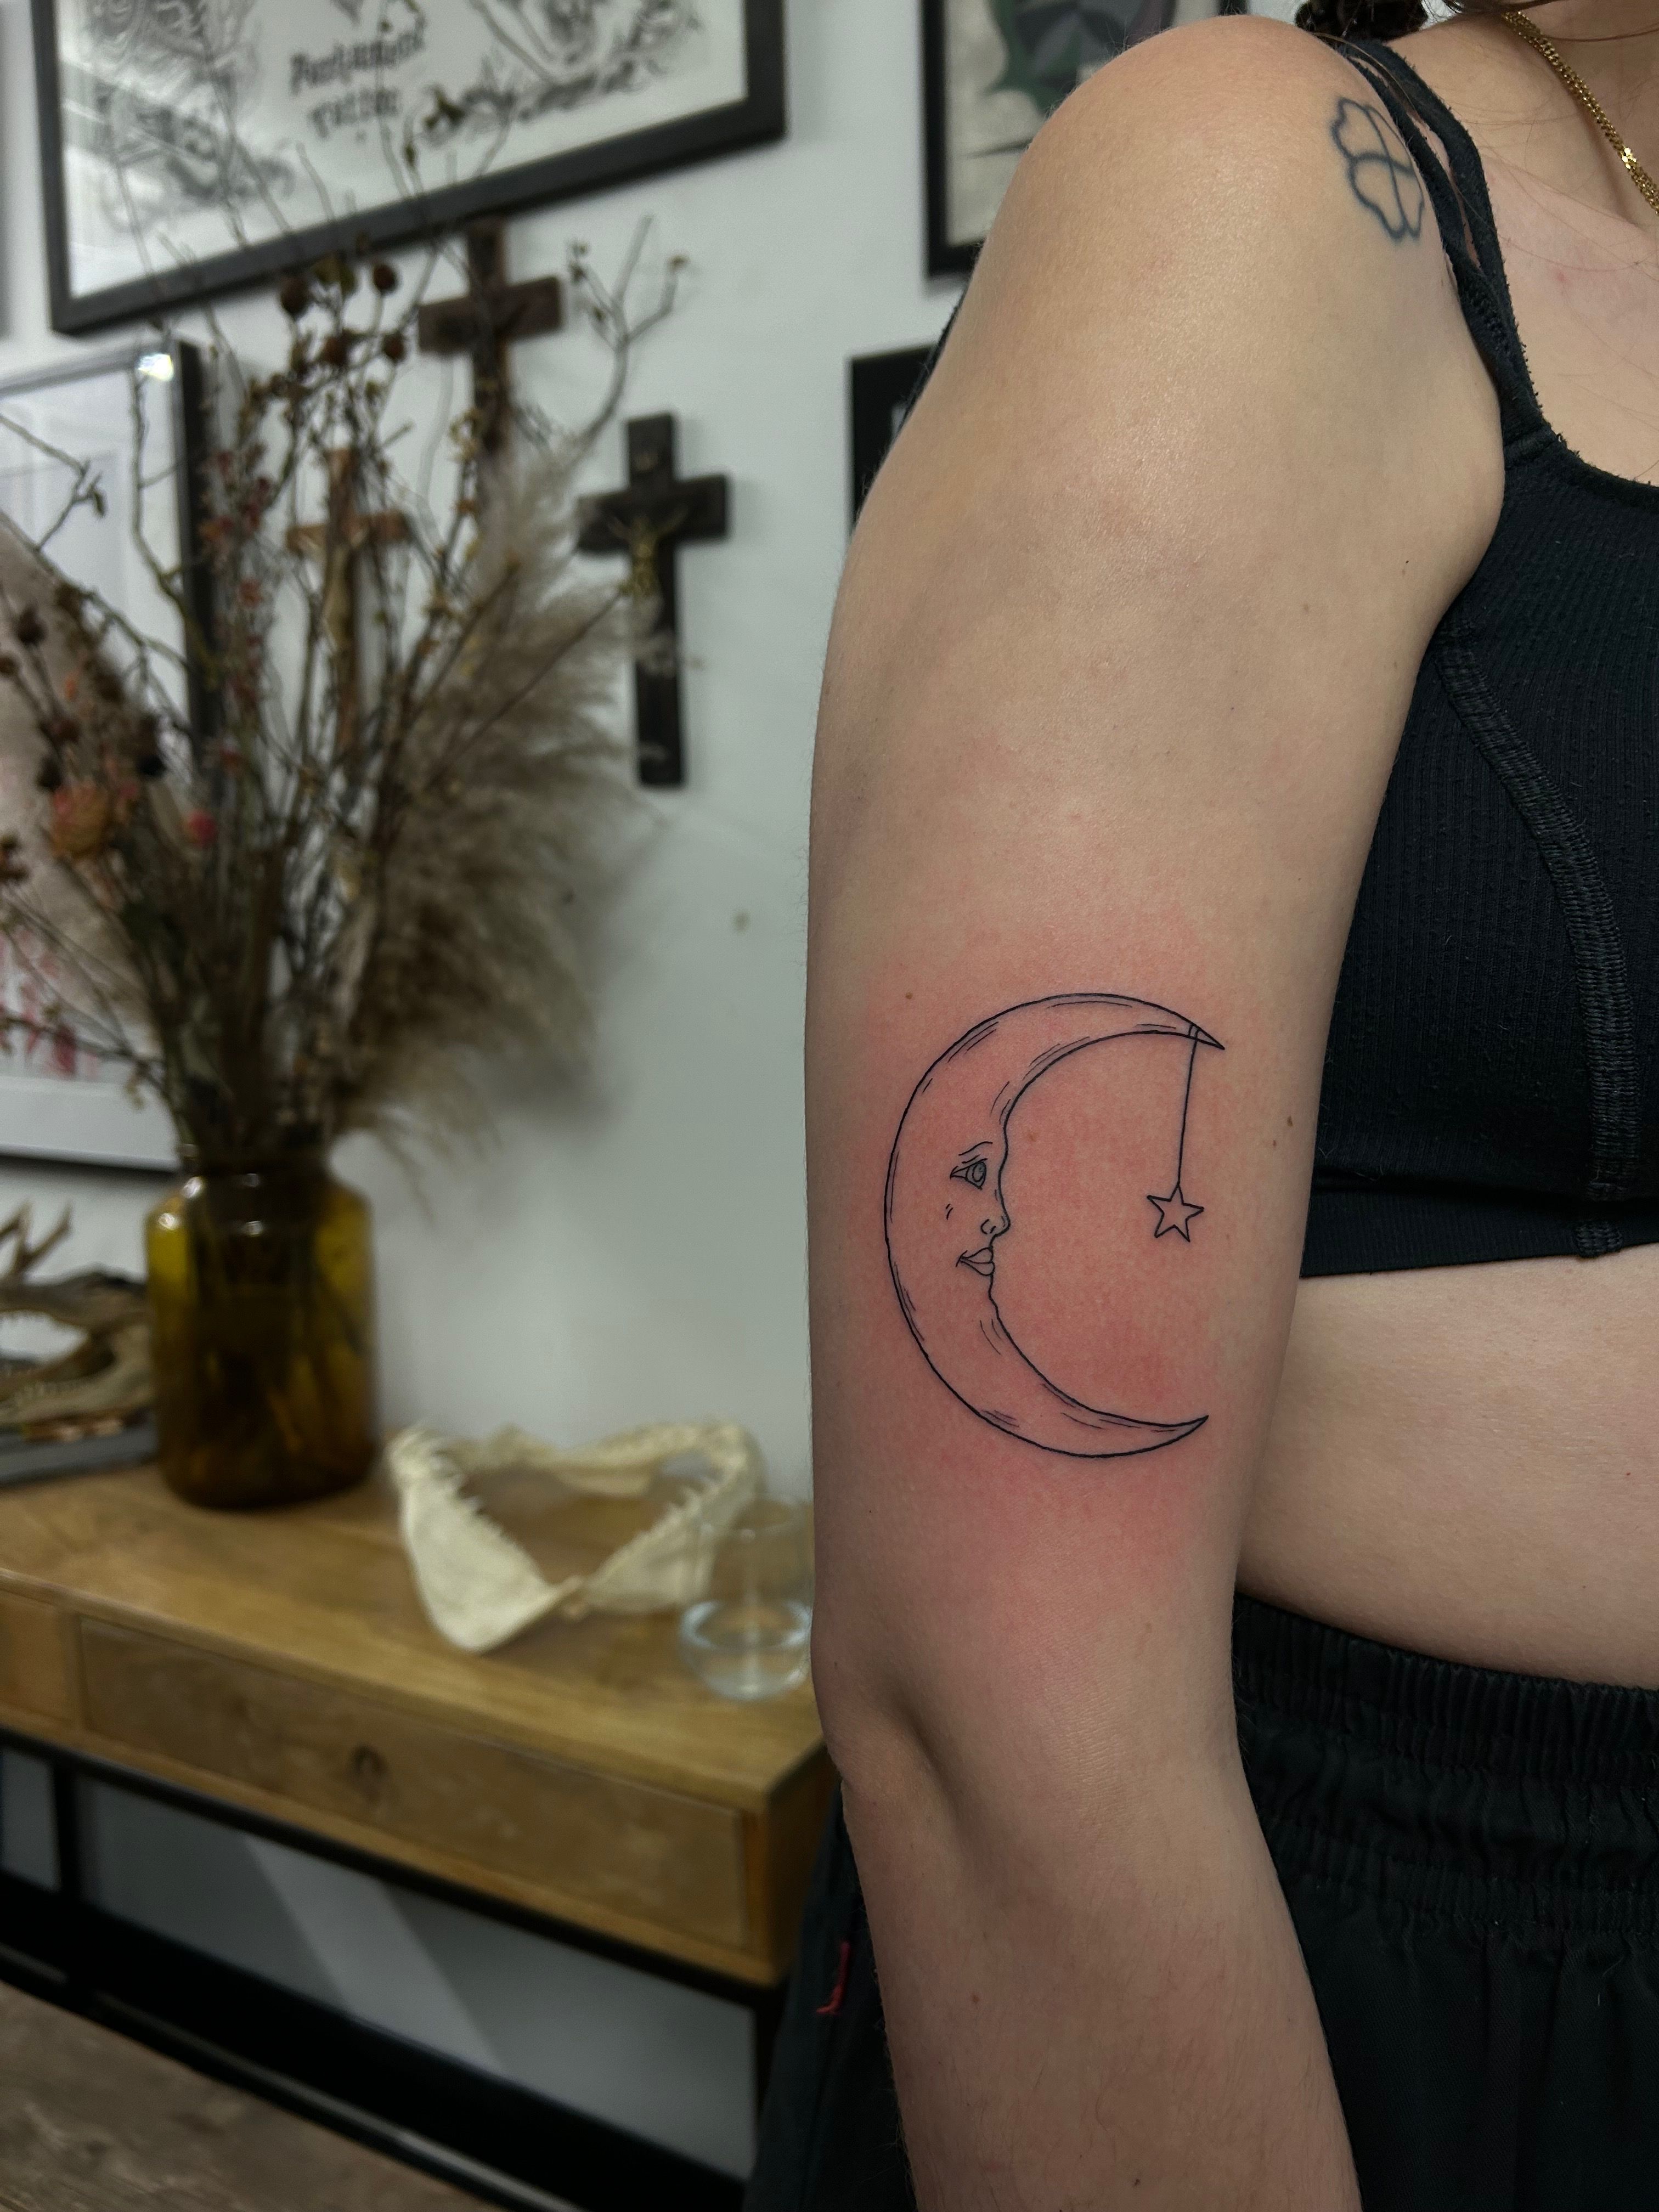 What does a crescent moon tattoo mean? - Quora